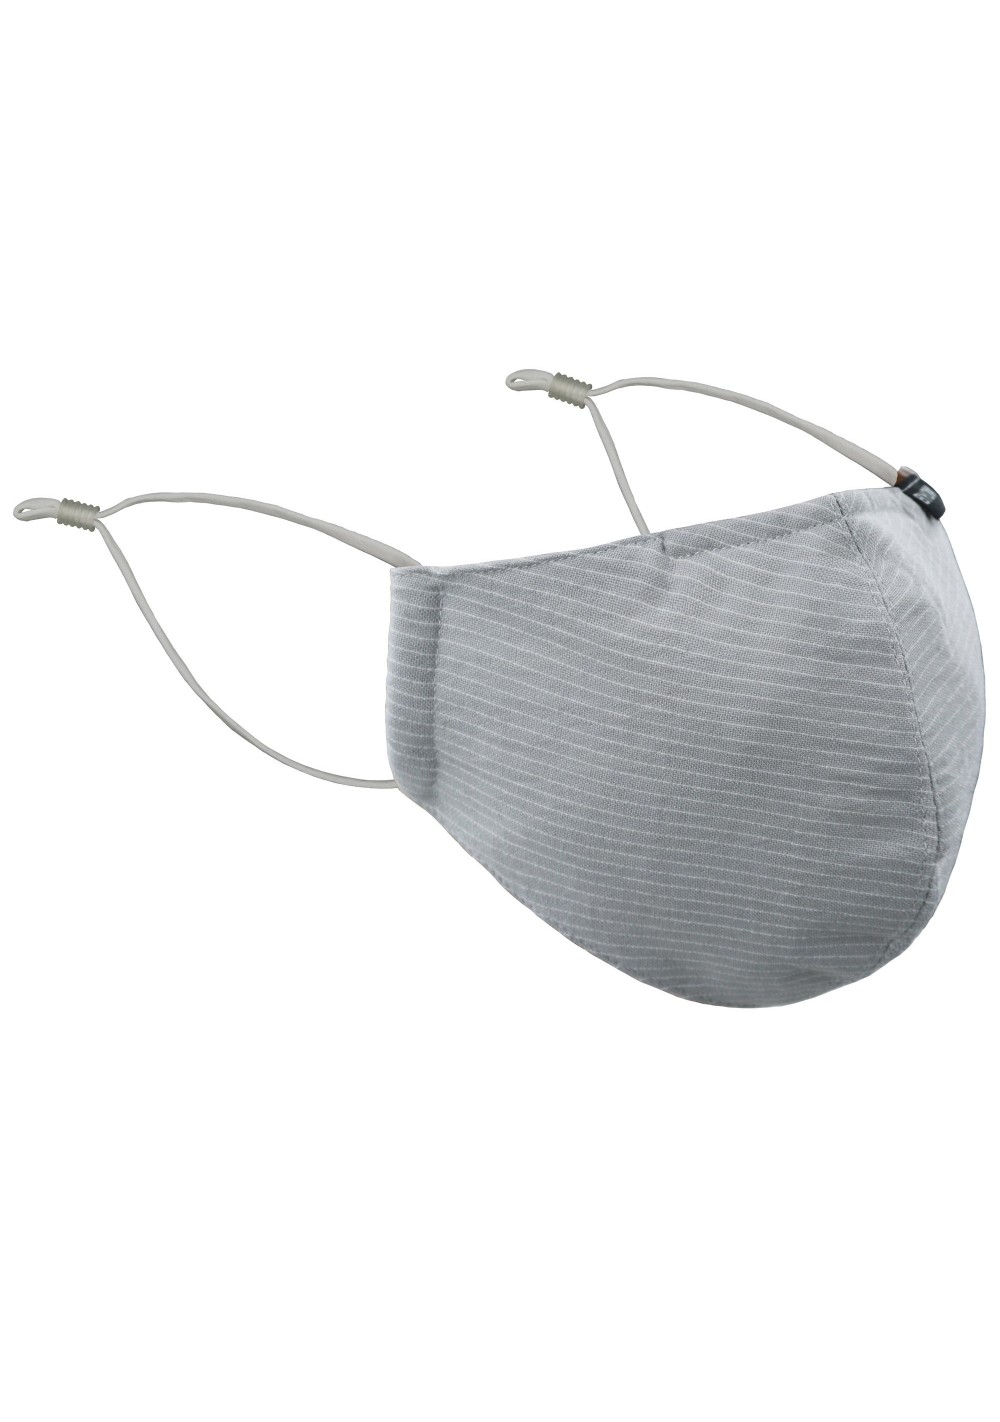 Pin Stripe Mask in Silver | Silver Gray Cotton Mask with Pin Stripes ...